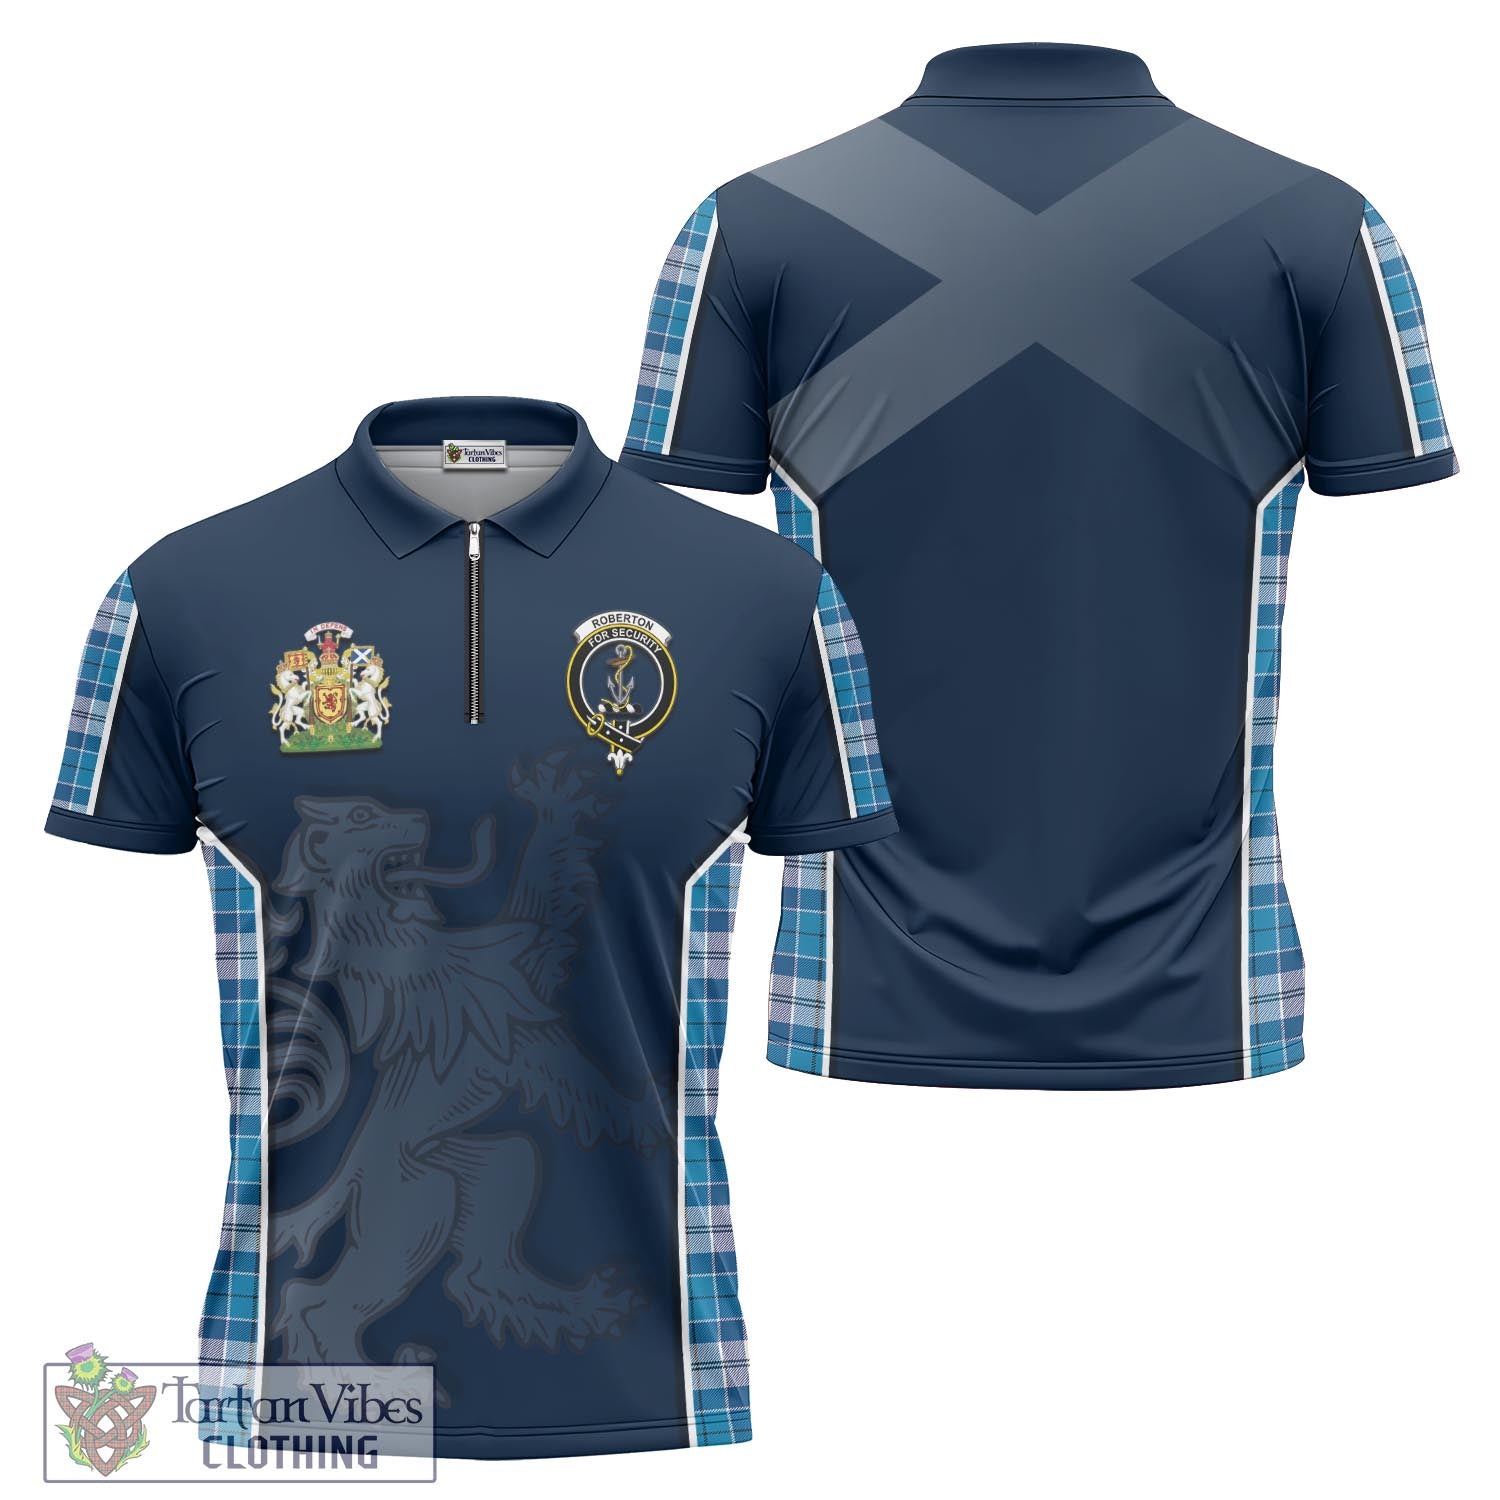 Tartan Vibes Clothing Roberton Tartan Zipper Polo Shirt with Family Crest and Lion Rampant Vibes Sport Style